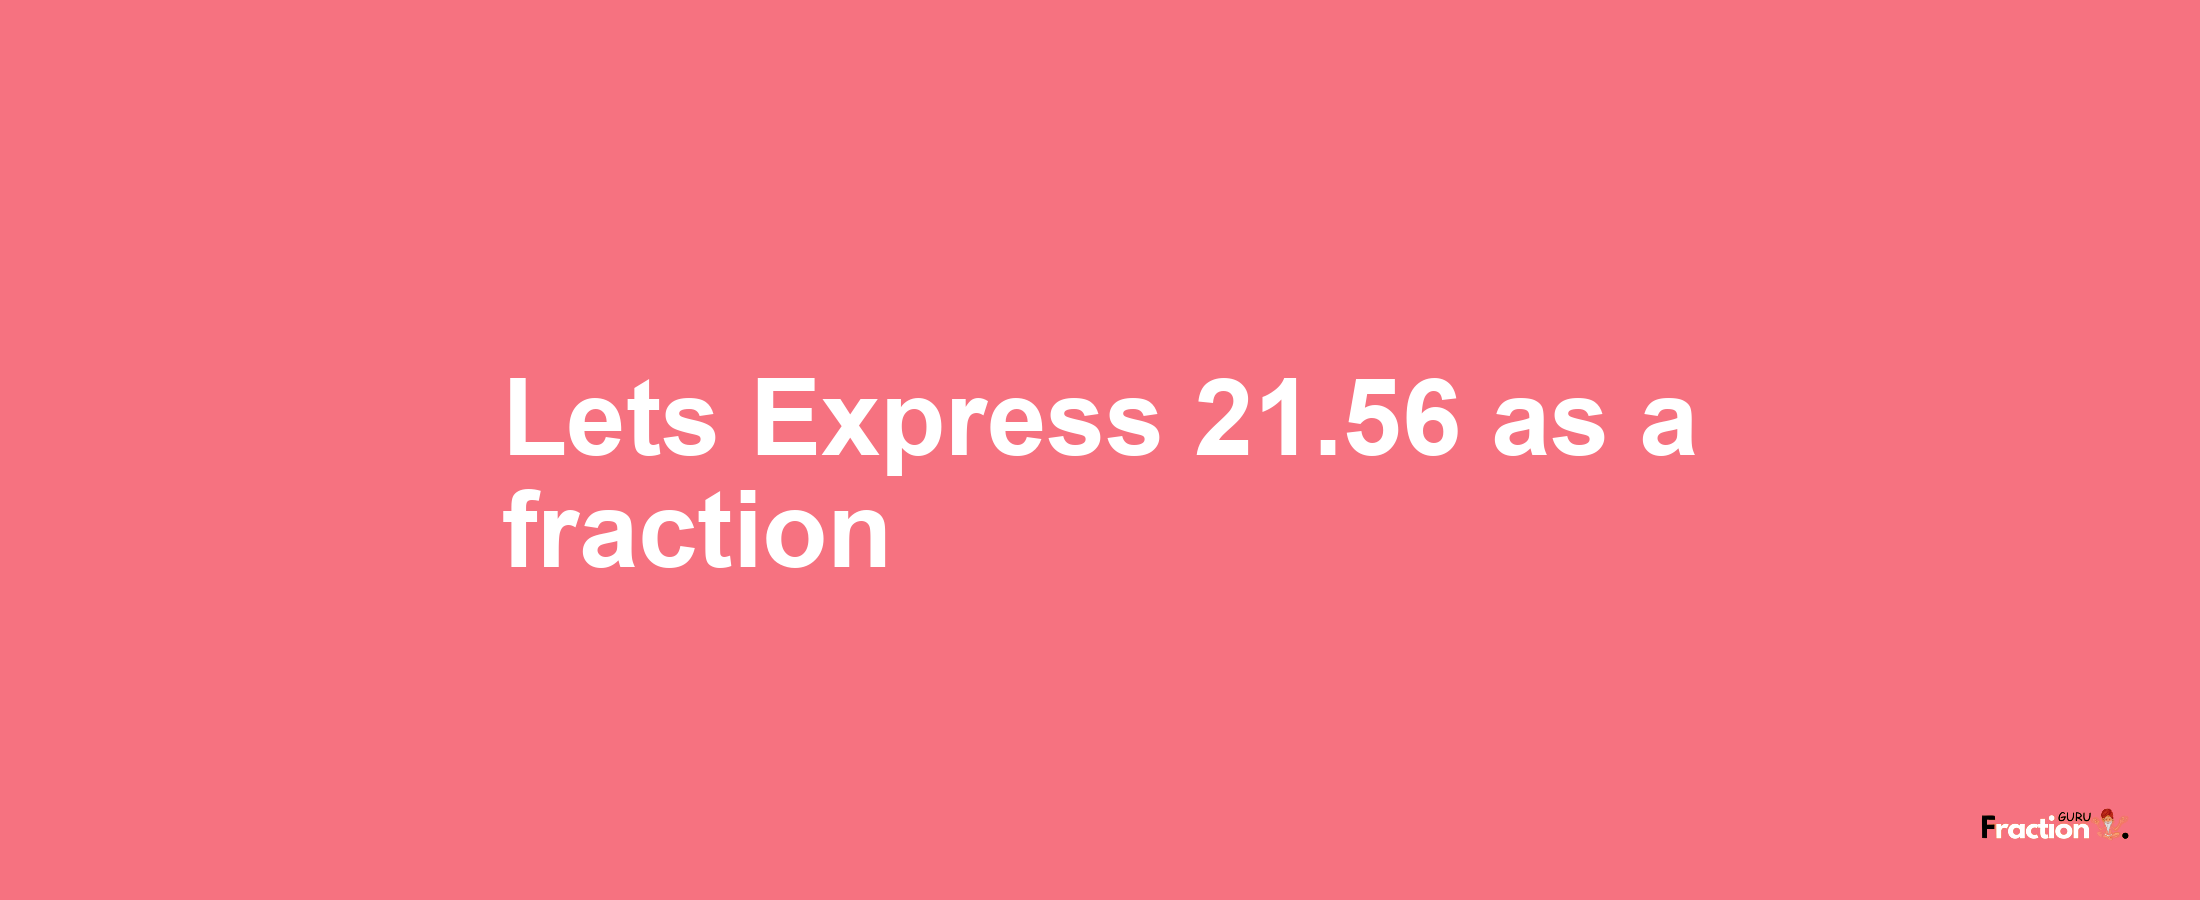 Lets Express 21.56 as afraction